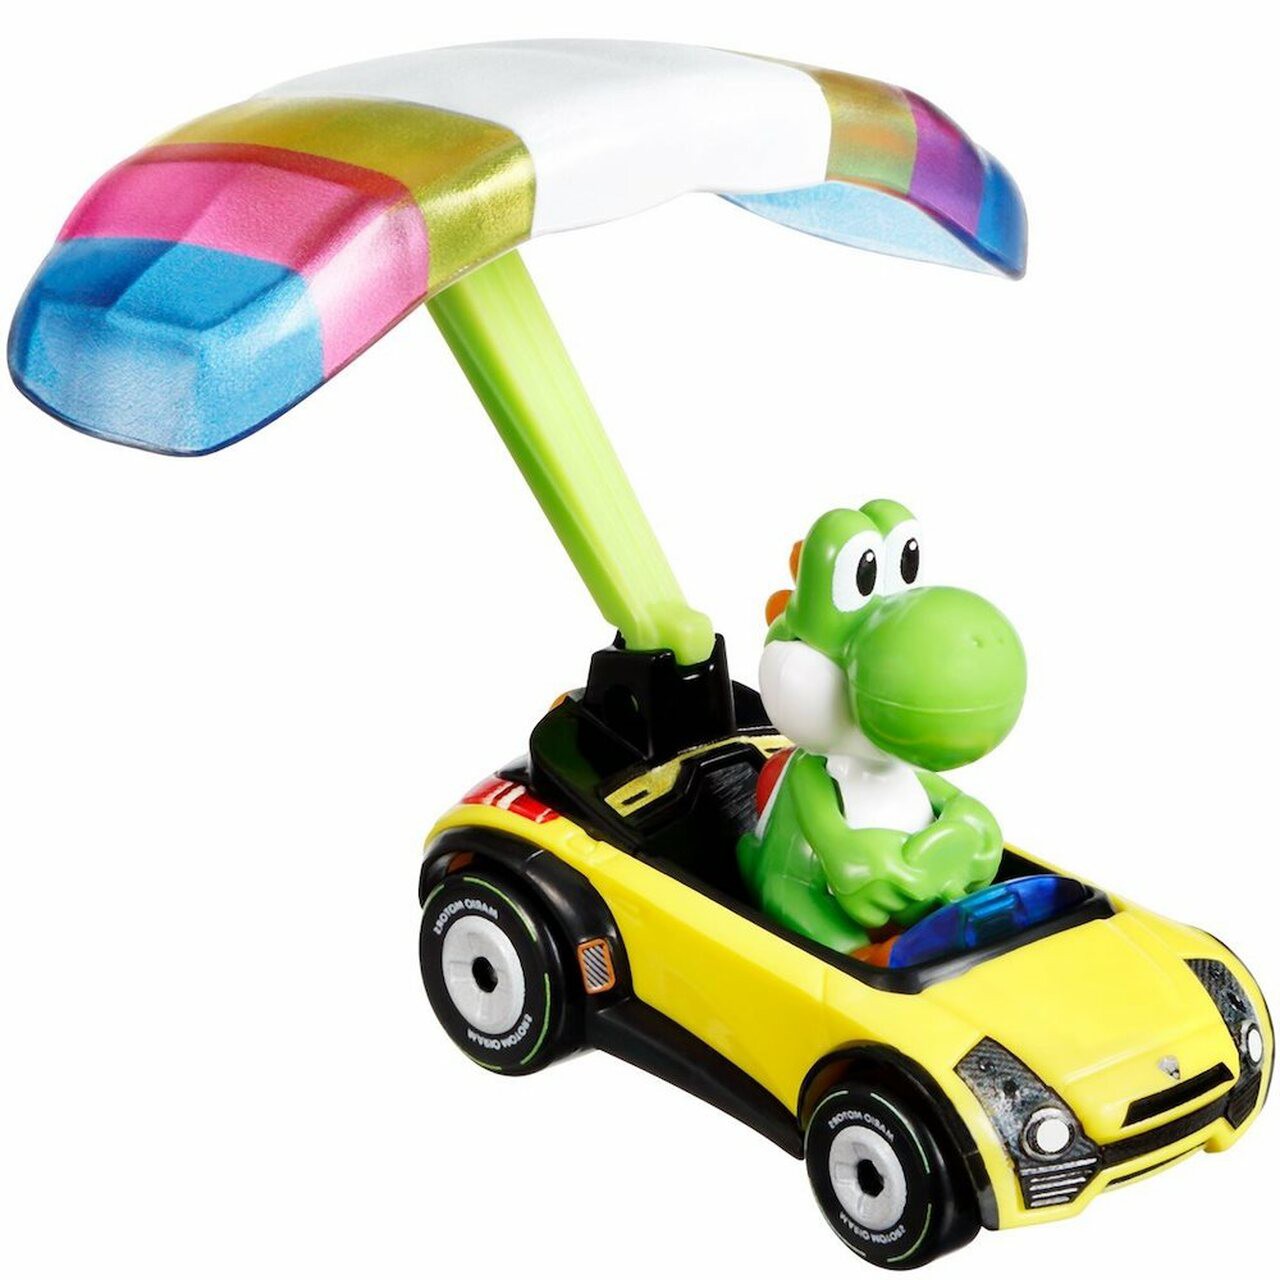 Hot Wheels Mario Kart Sports Coupe + Parafoil Glider Yoshi Diecast Car [Loose] - Picture 1 of 1